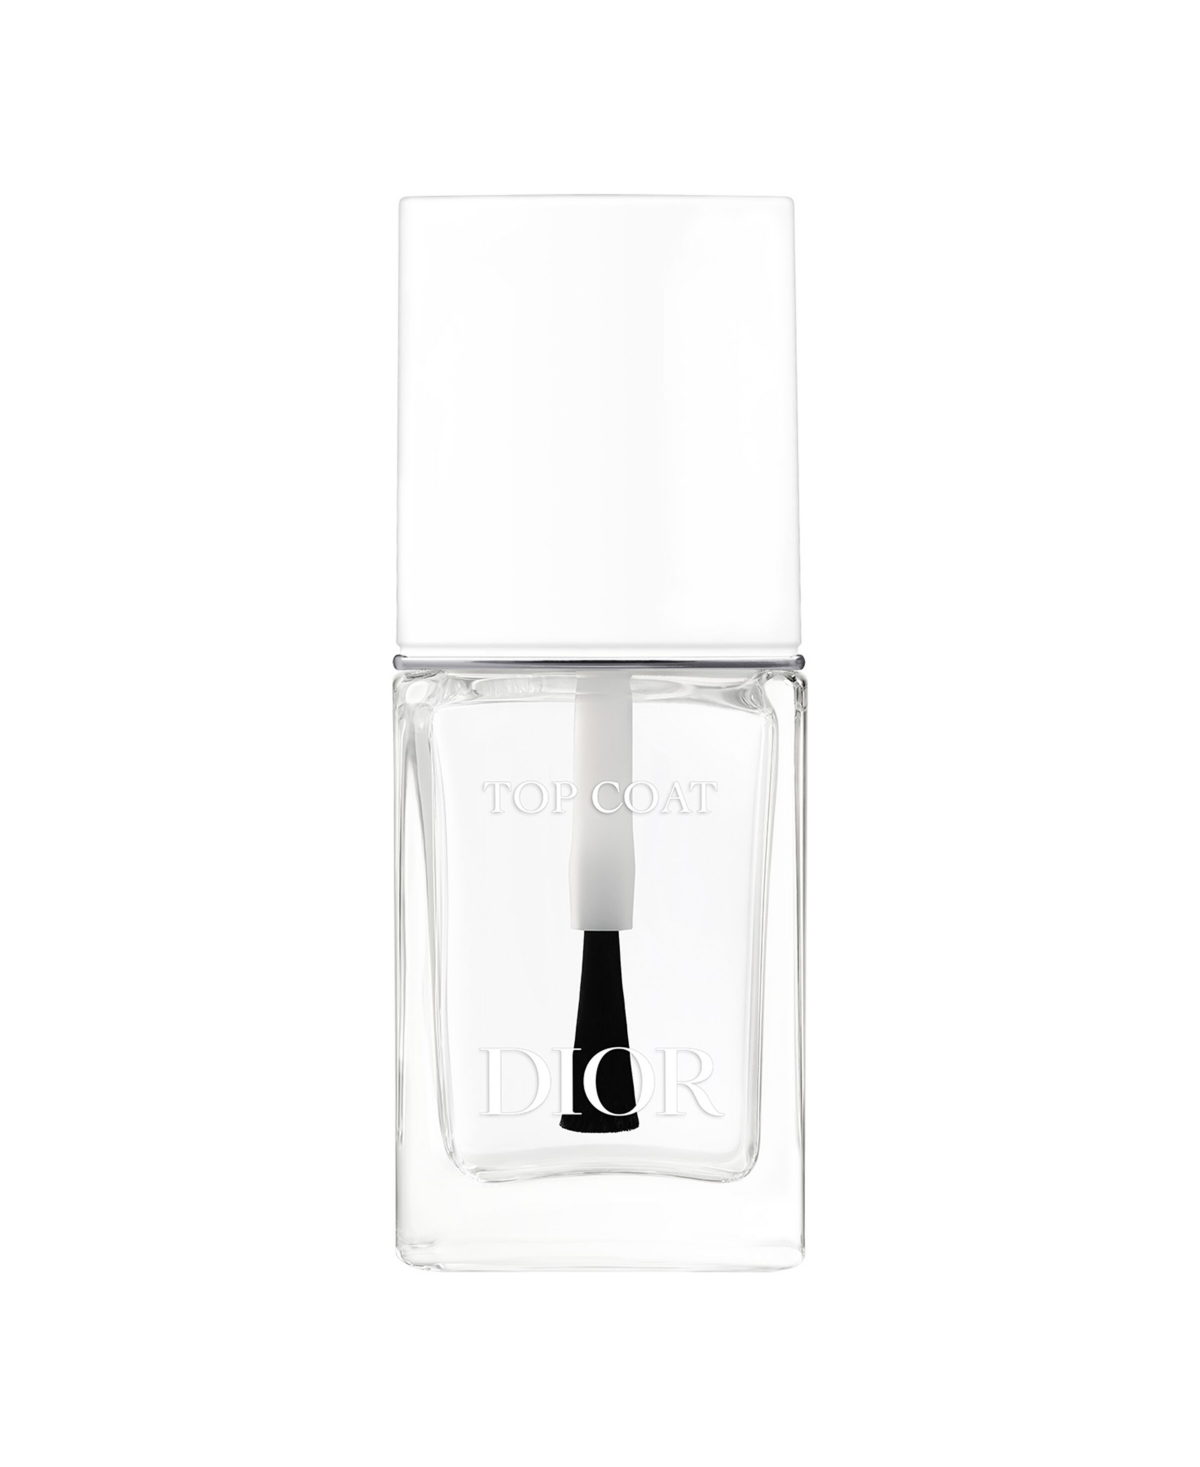 Dior Top Coat Ultra-fast-drying Setting Nail Lacquer In No Color